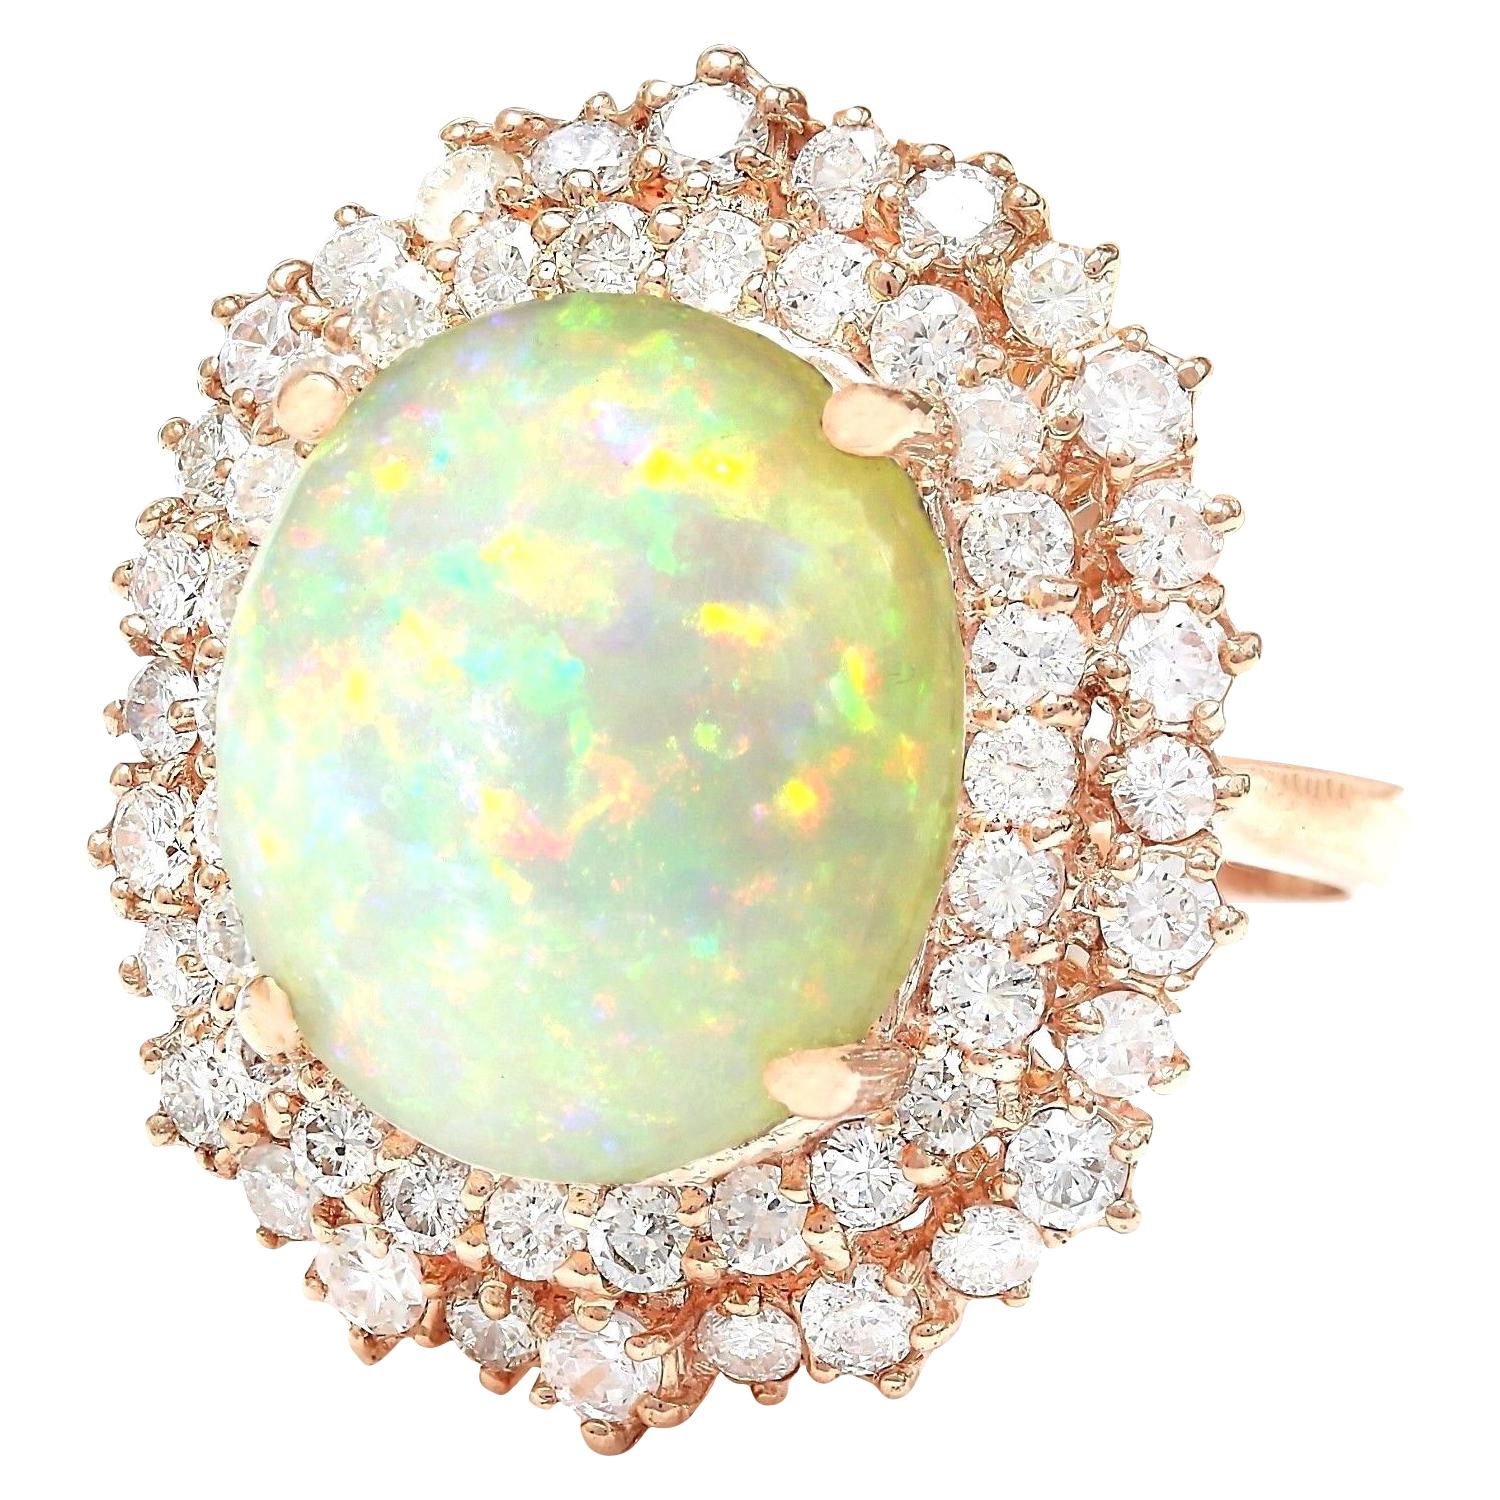 7.70 Carat Natural Opal 14K Solid Rose Gold Diamond Ring
 Item Type: Ring
 Item Style: Cocktail
 Material: 14K Rose Gold
 Mainstone: Opal
 Stone Color: Multicolor
 Stone Weight: 5.70 Carat
 Stone Shape: Oval
 Stone Quantity: 1
 Stone Dimensions: